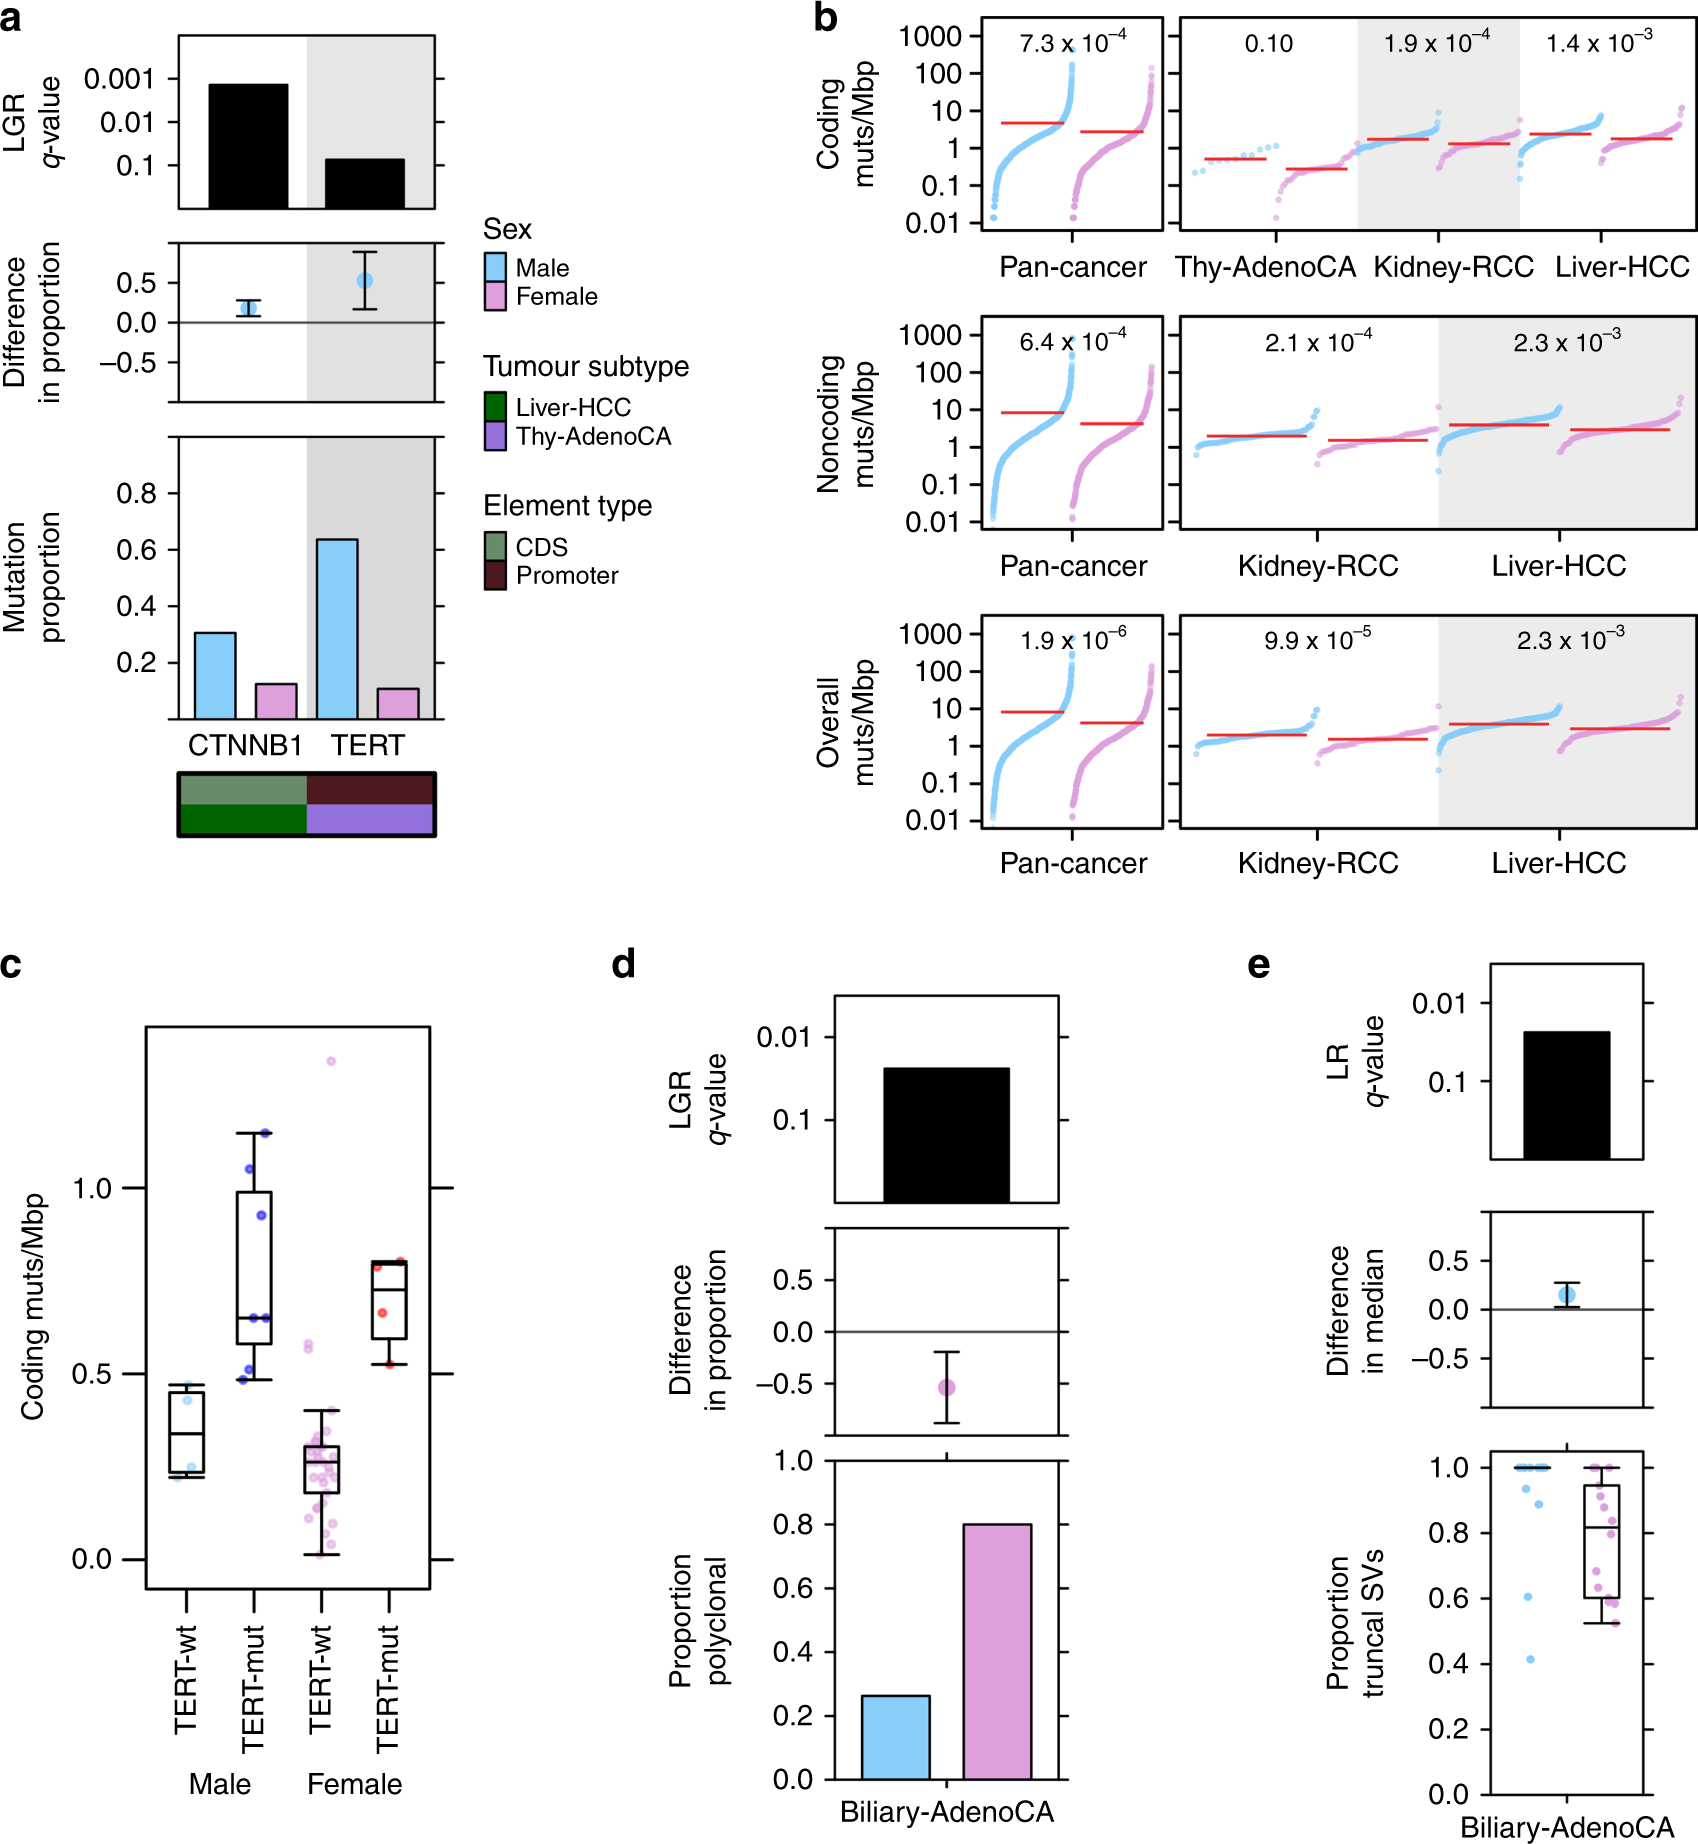 Sex differences in oncogenic mutational processes Nature Communications